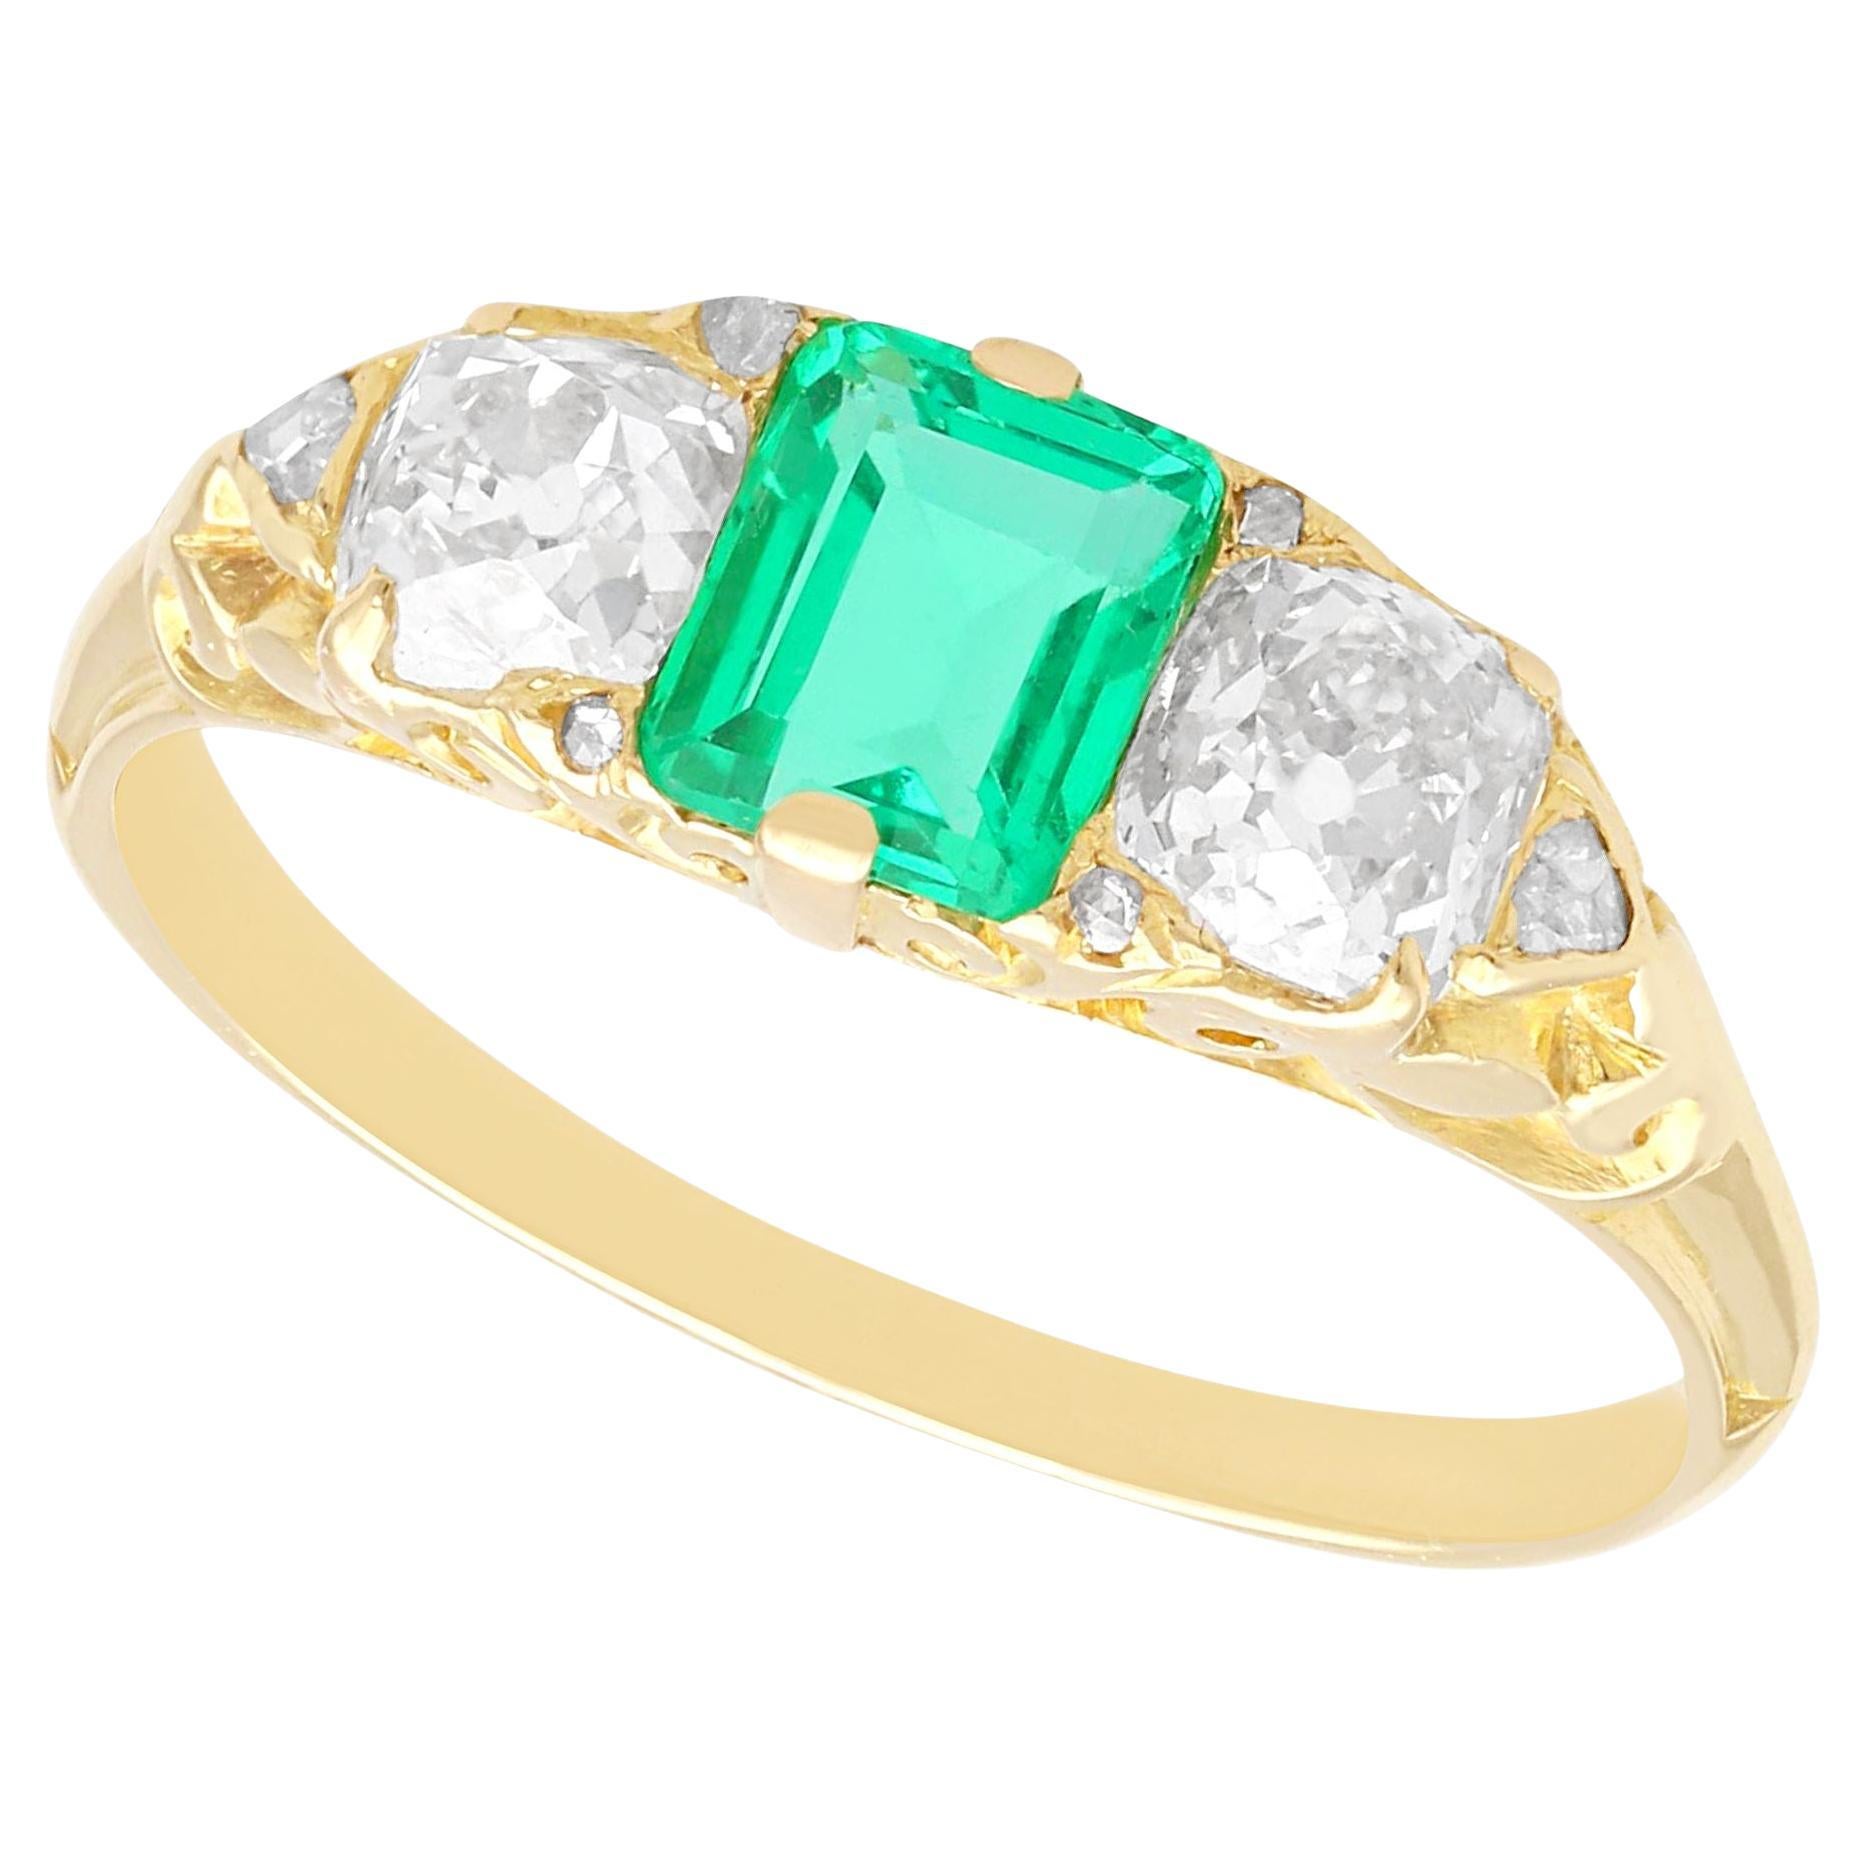 Antique 0.64ct Emerald 0.79ct Diamond 18k Yellow Gold Trilogy Ring, circa 1920 For Sale